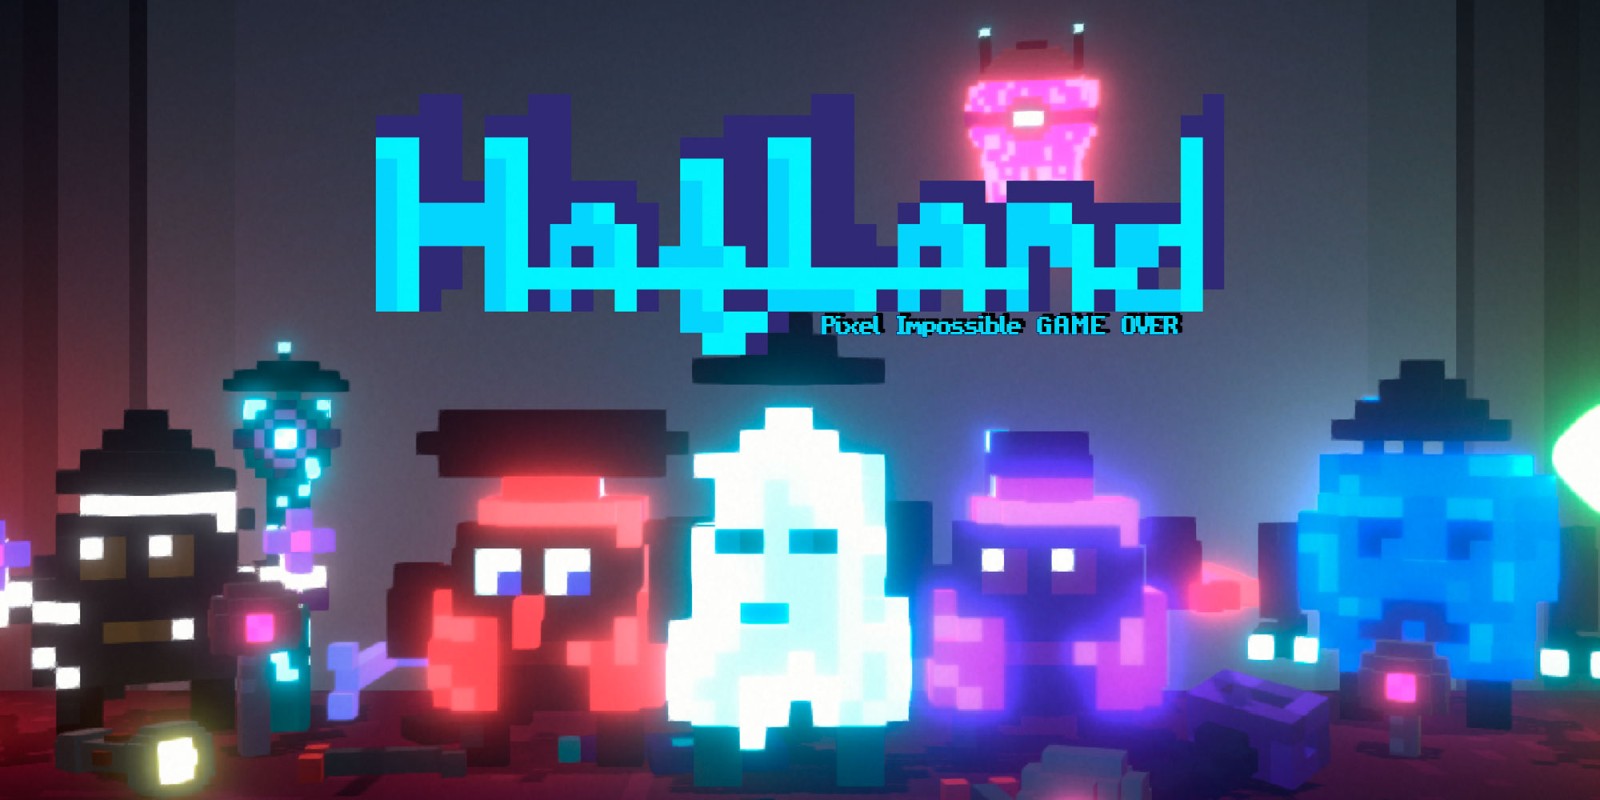 HatLand - Pixel Impossible GAME OVER